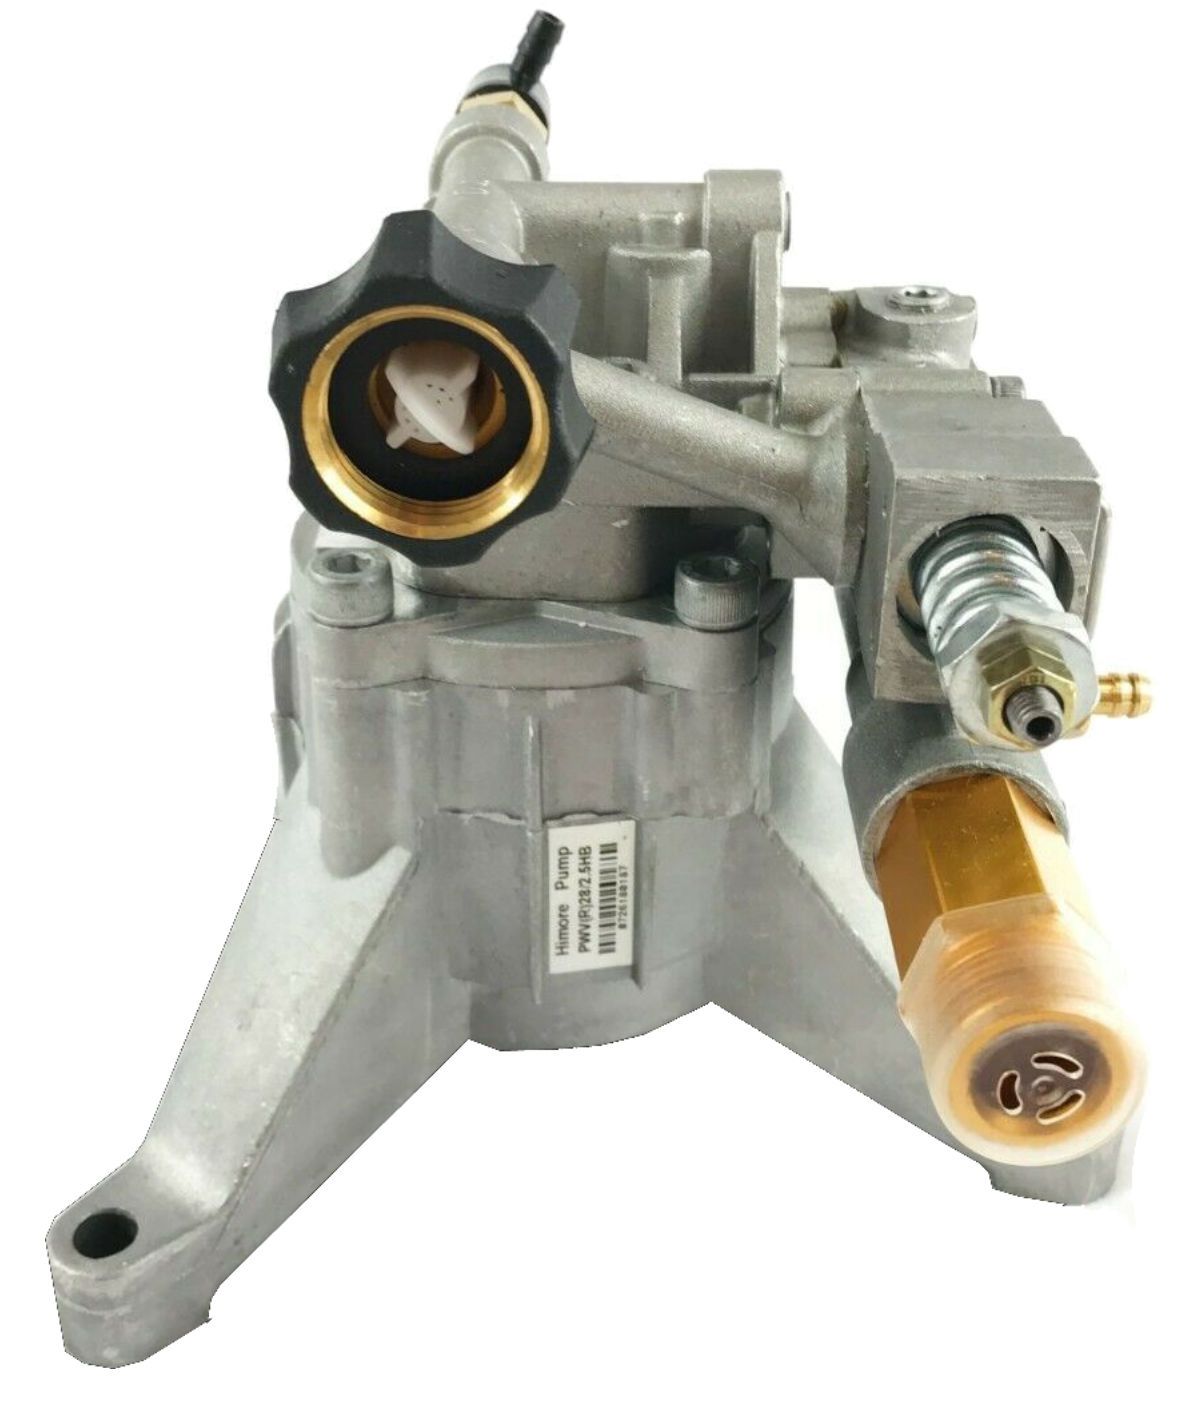 2700 PSI PRESSURE WASHER WATER PUMP Campbell Hausfeld PW1755V5LE - AE-Power